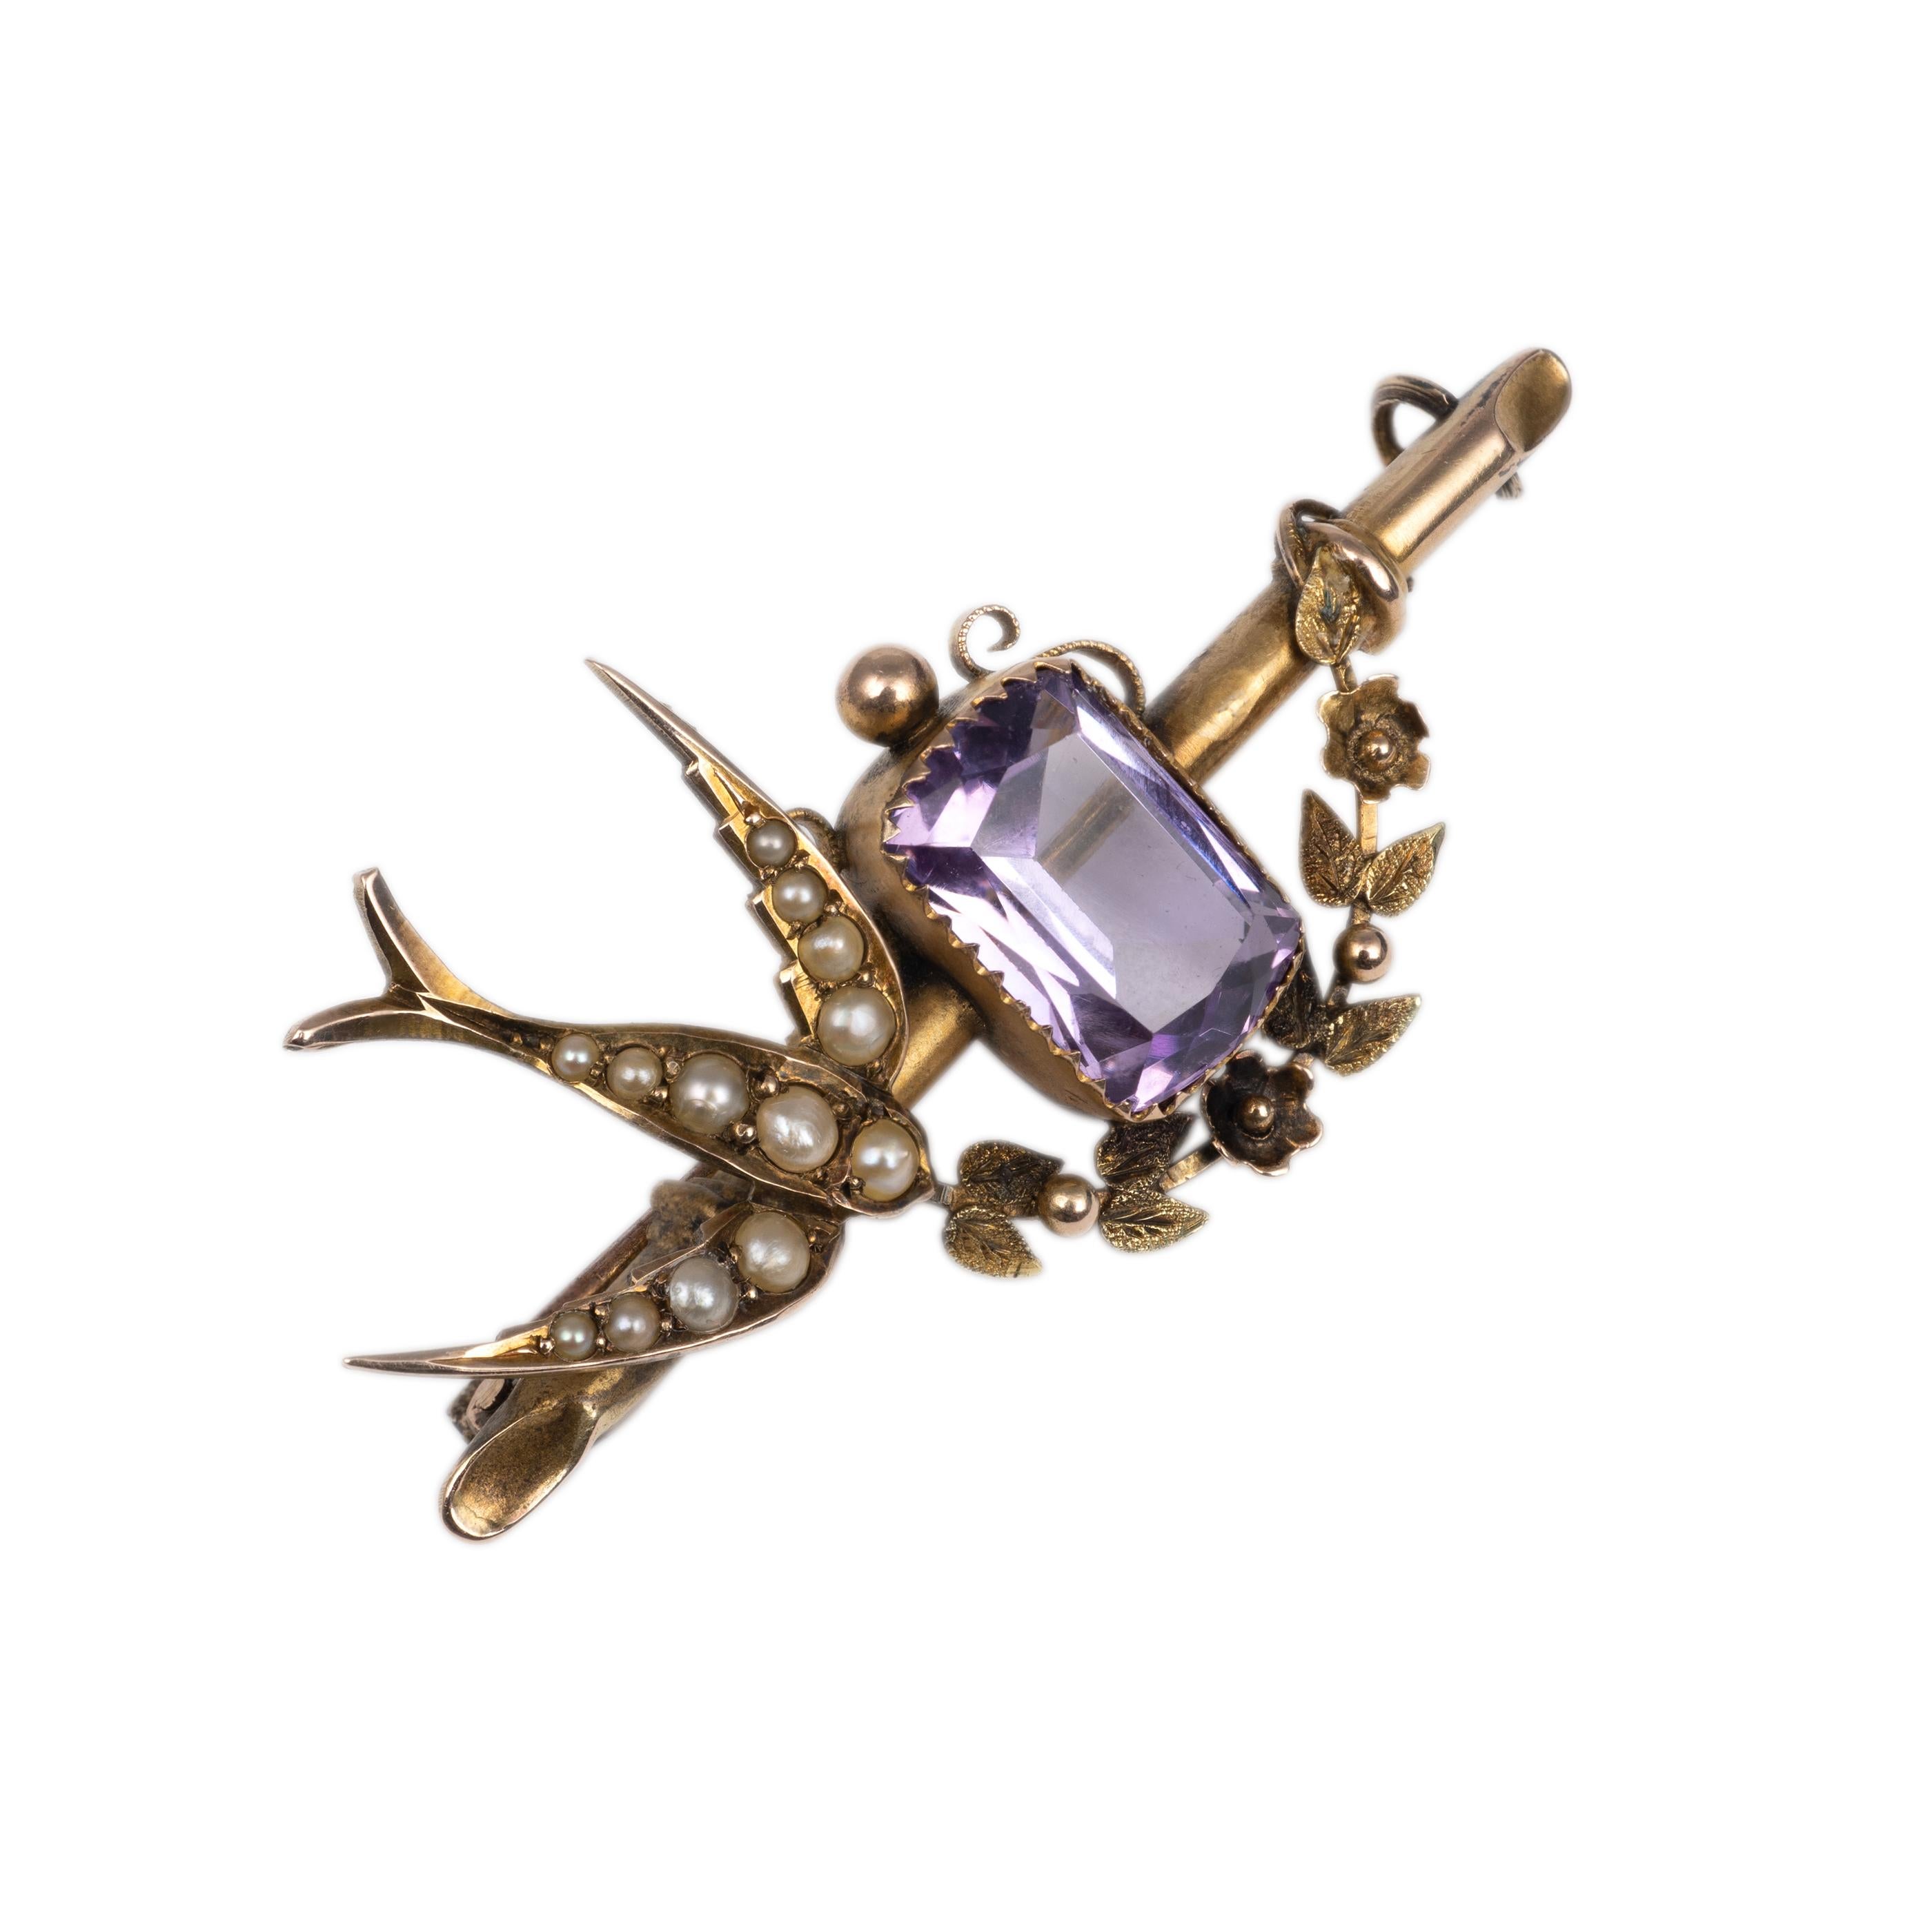 A delightful antique amethyst snd pearls Swallow bird & flower garland sweetheart brooch, crafted in rose gold, circa 1900.
The delightful brooch features a gorgeous centred rectangle cushion cut amethyst with a scene of seed pearl swallow bird and